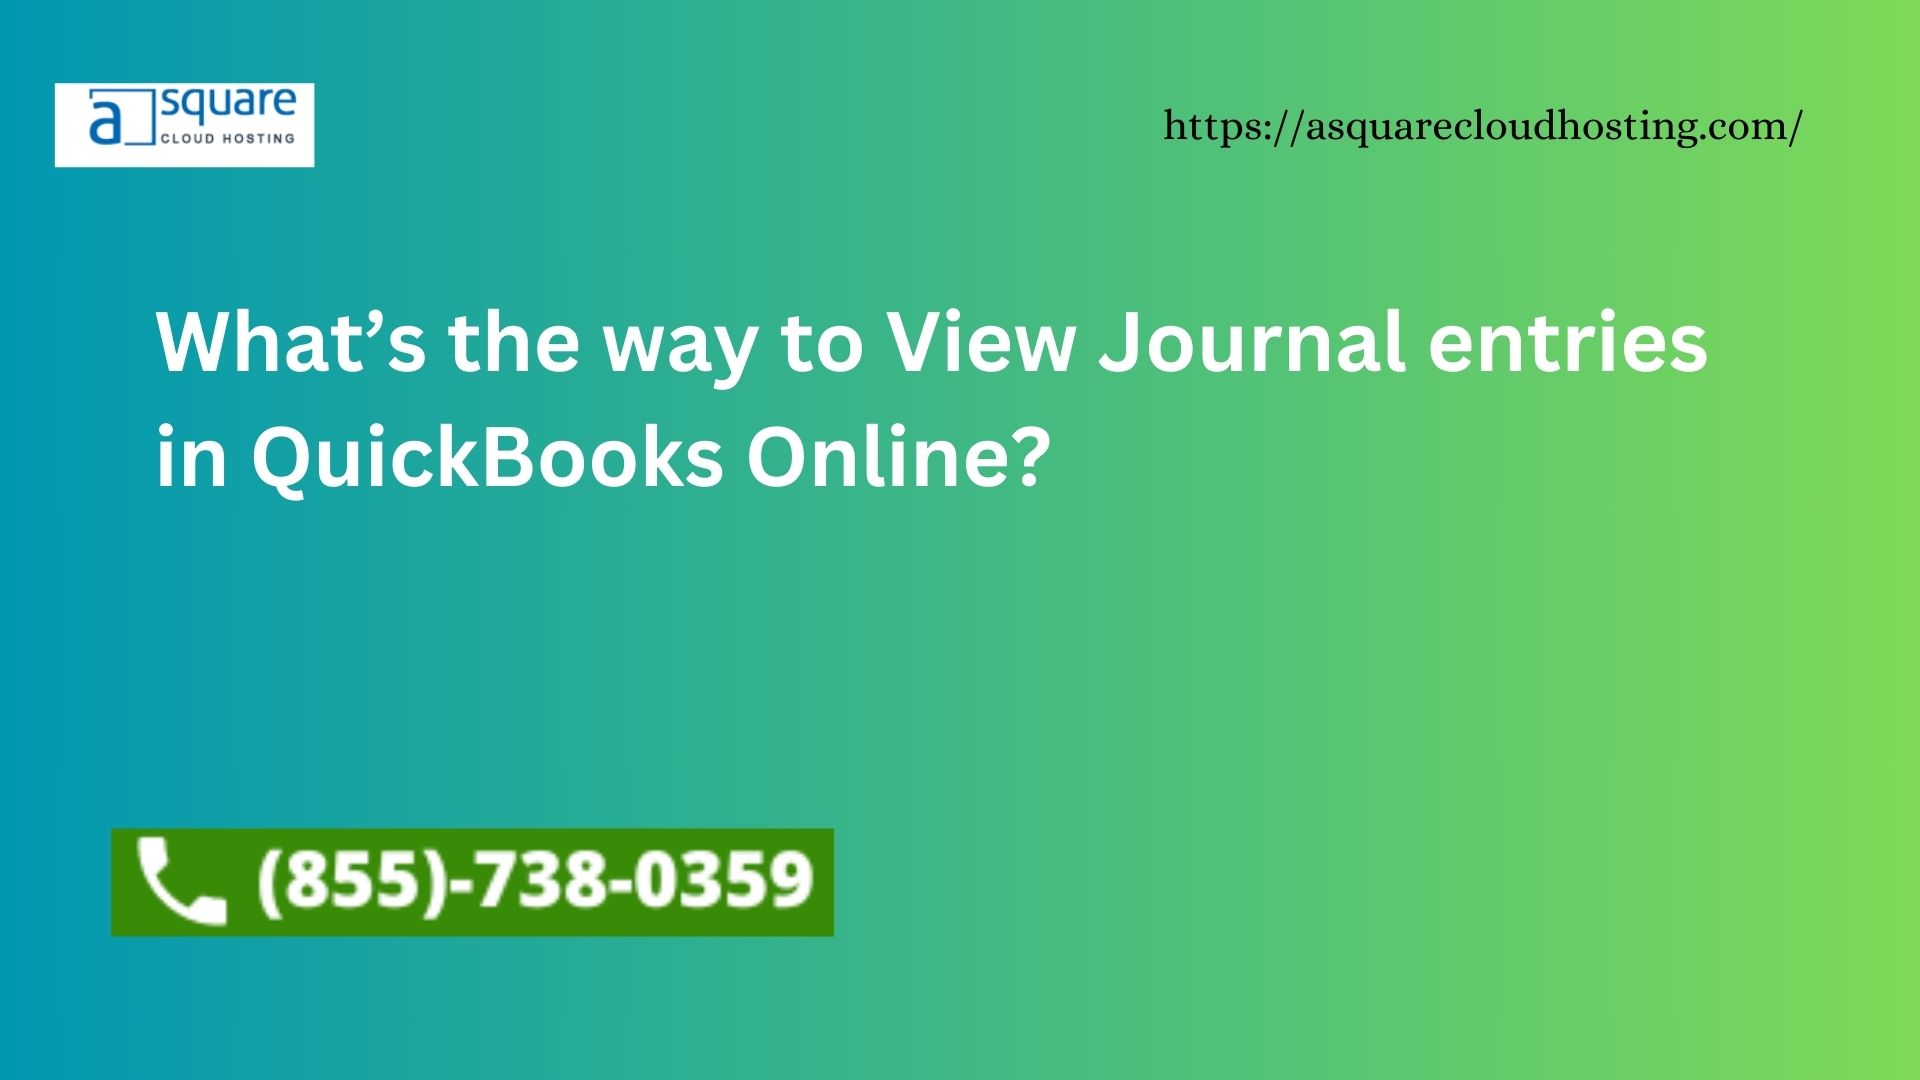 What’s the way to View Journal entries in QuickBooks Online?